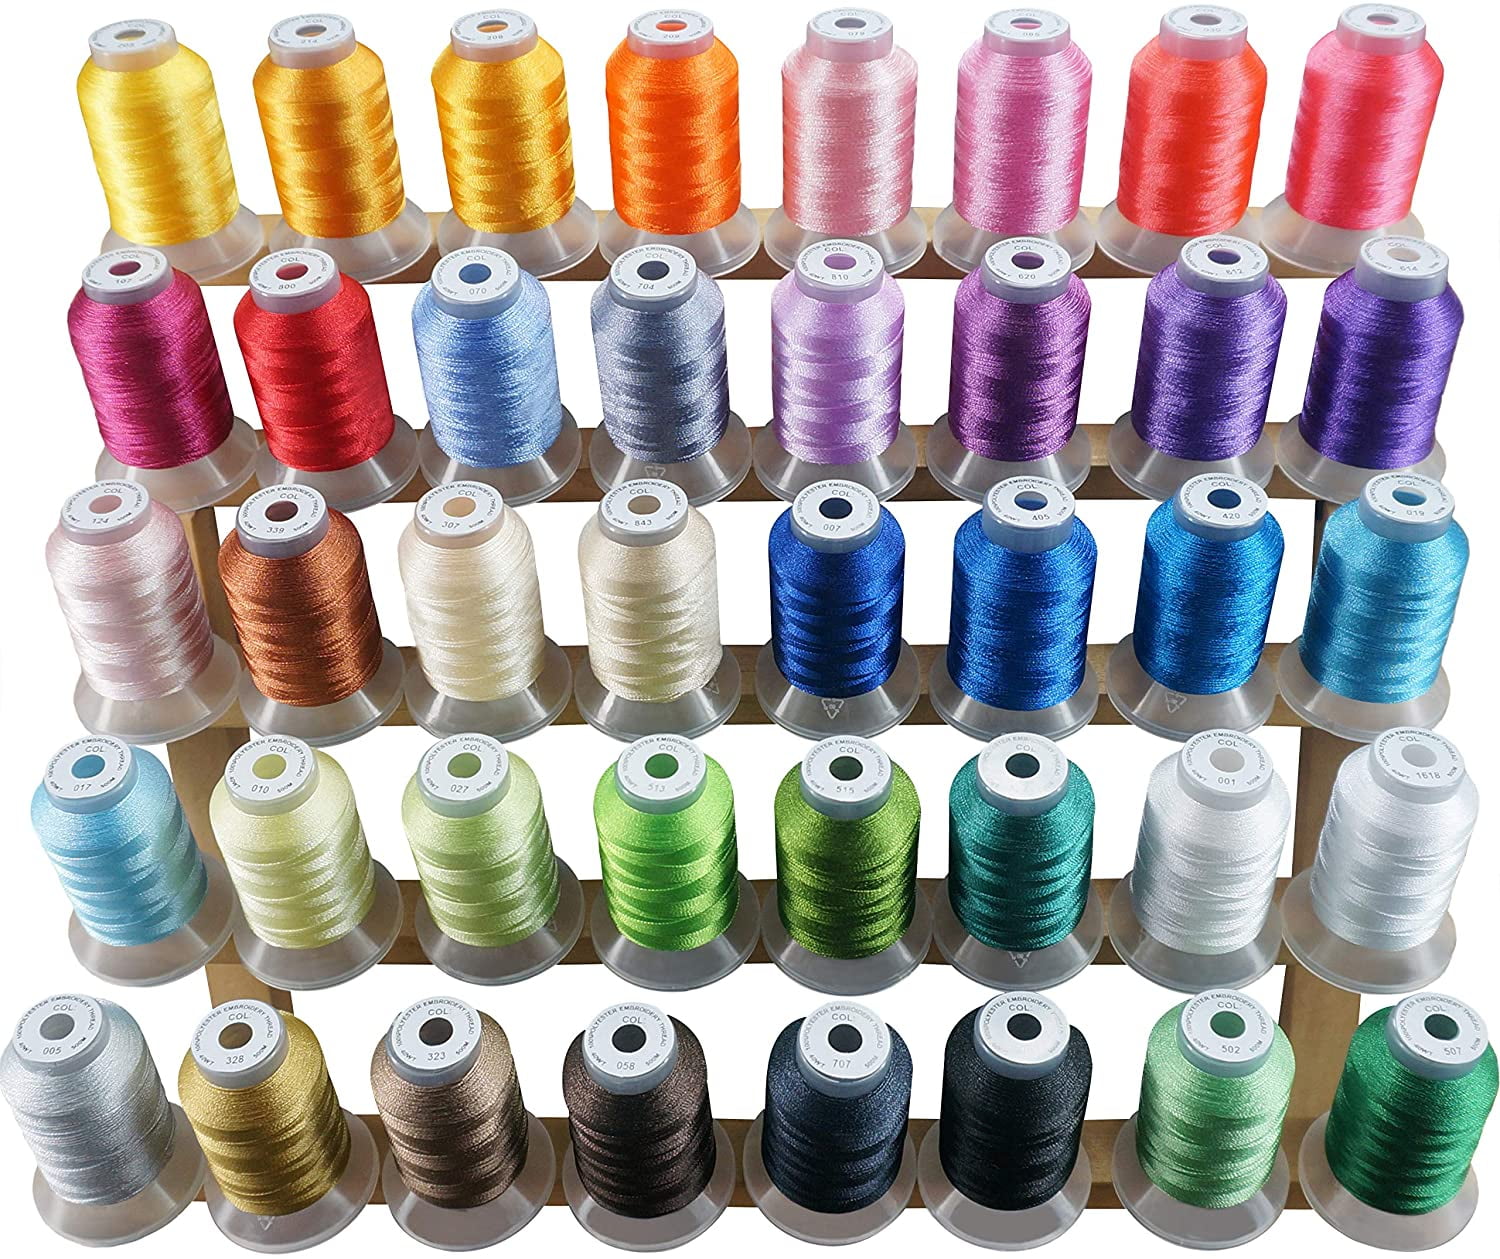 PeavyTailor 60 Colors Prewound Embroidery Bobbins 40 Wt Polyester Embroidery Machine Thread for Brother Babylock Janome Singer Pfaff Bernina Embroidery 